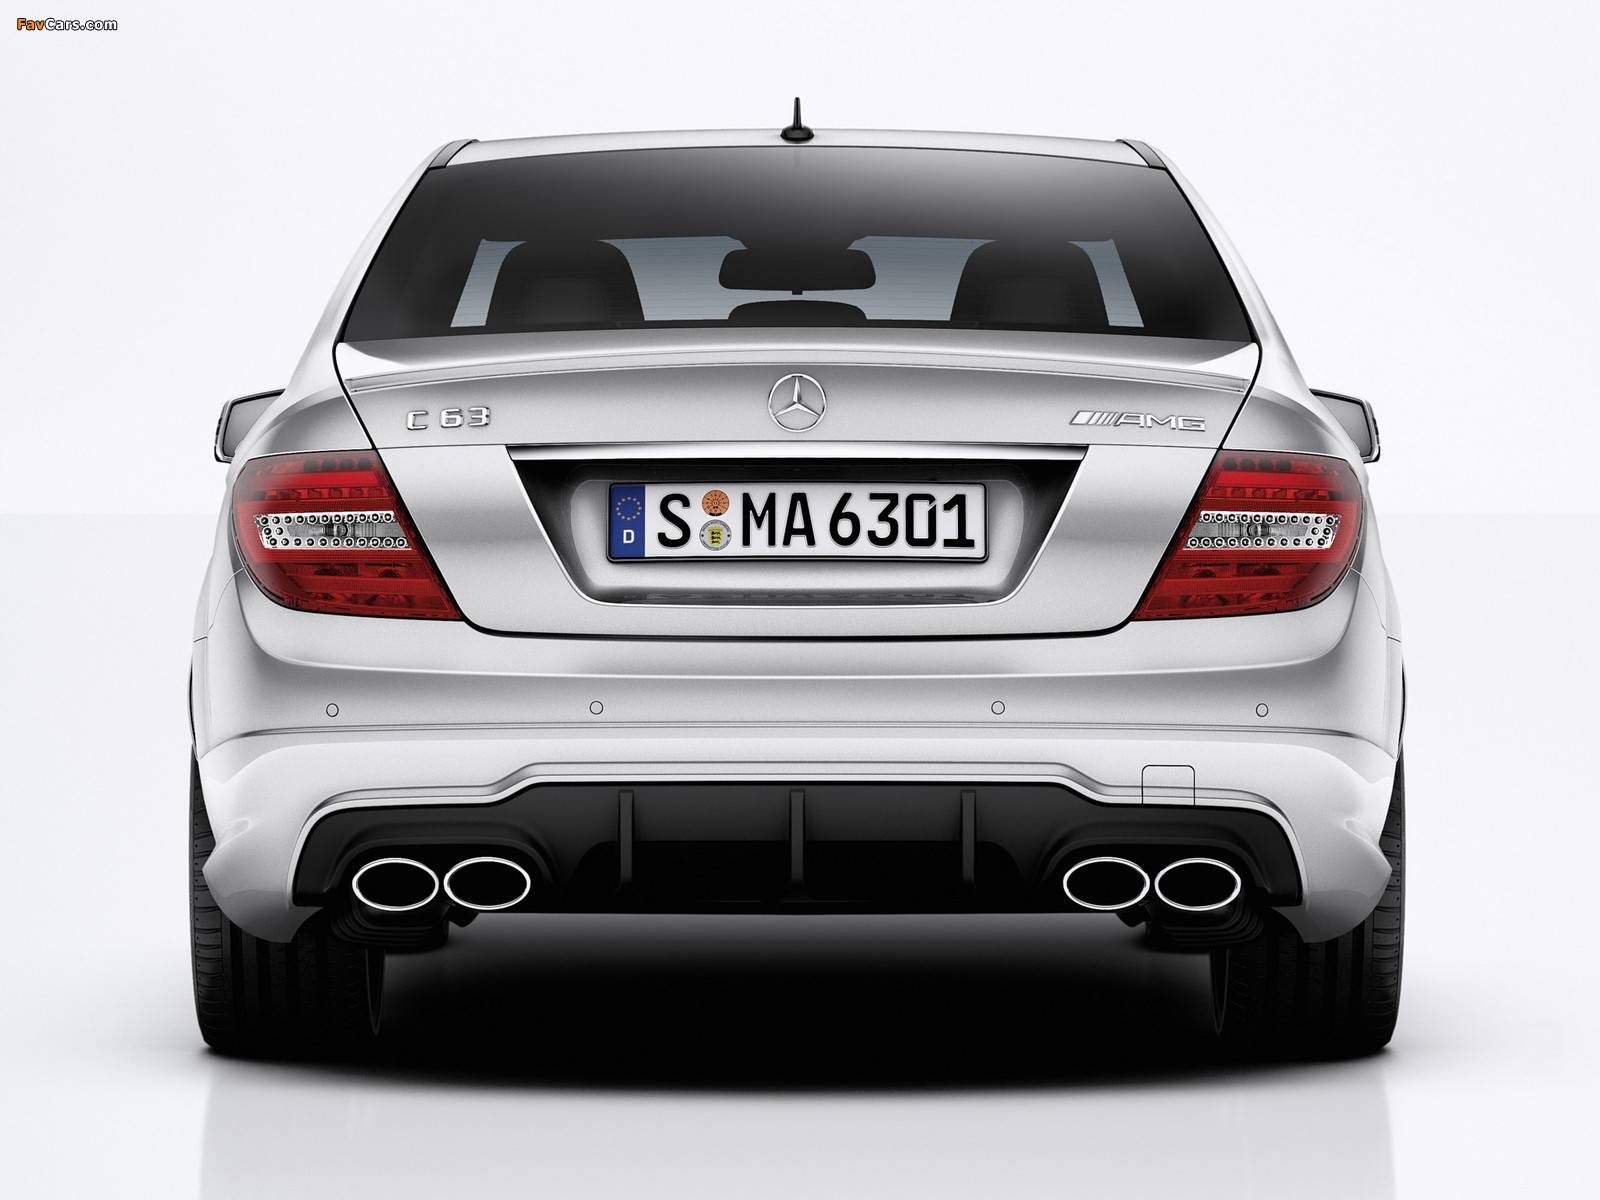 Mercedes-Benz C 63 AMG (W204) 2011 wallpapers (1600 x 1200)